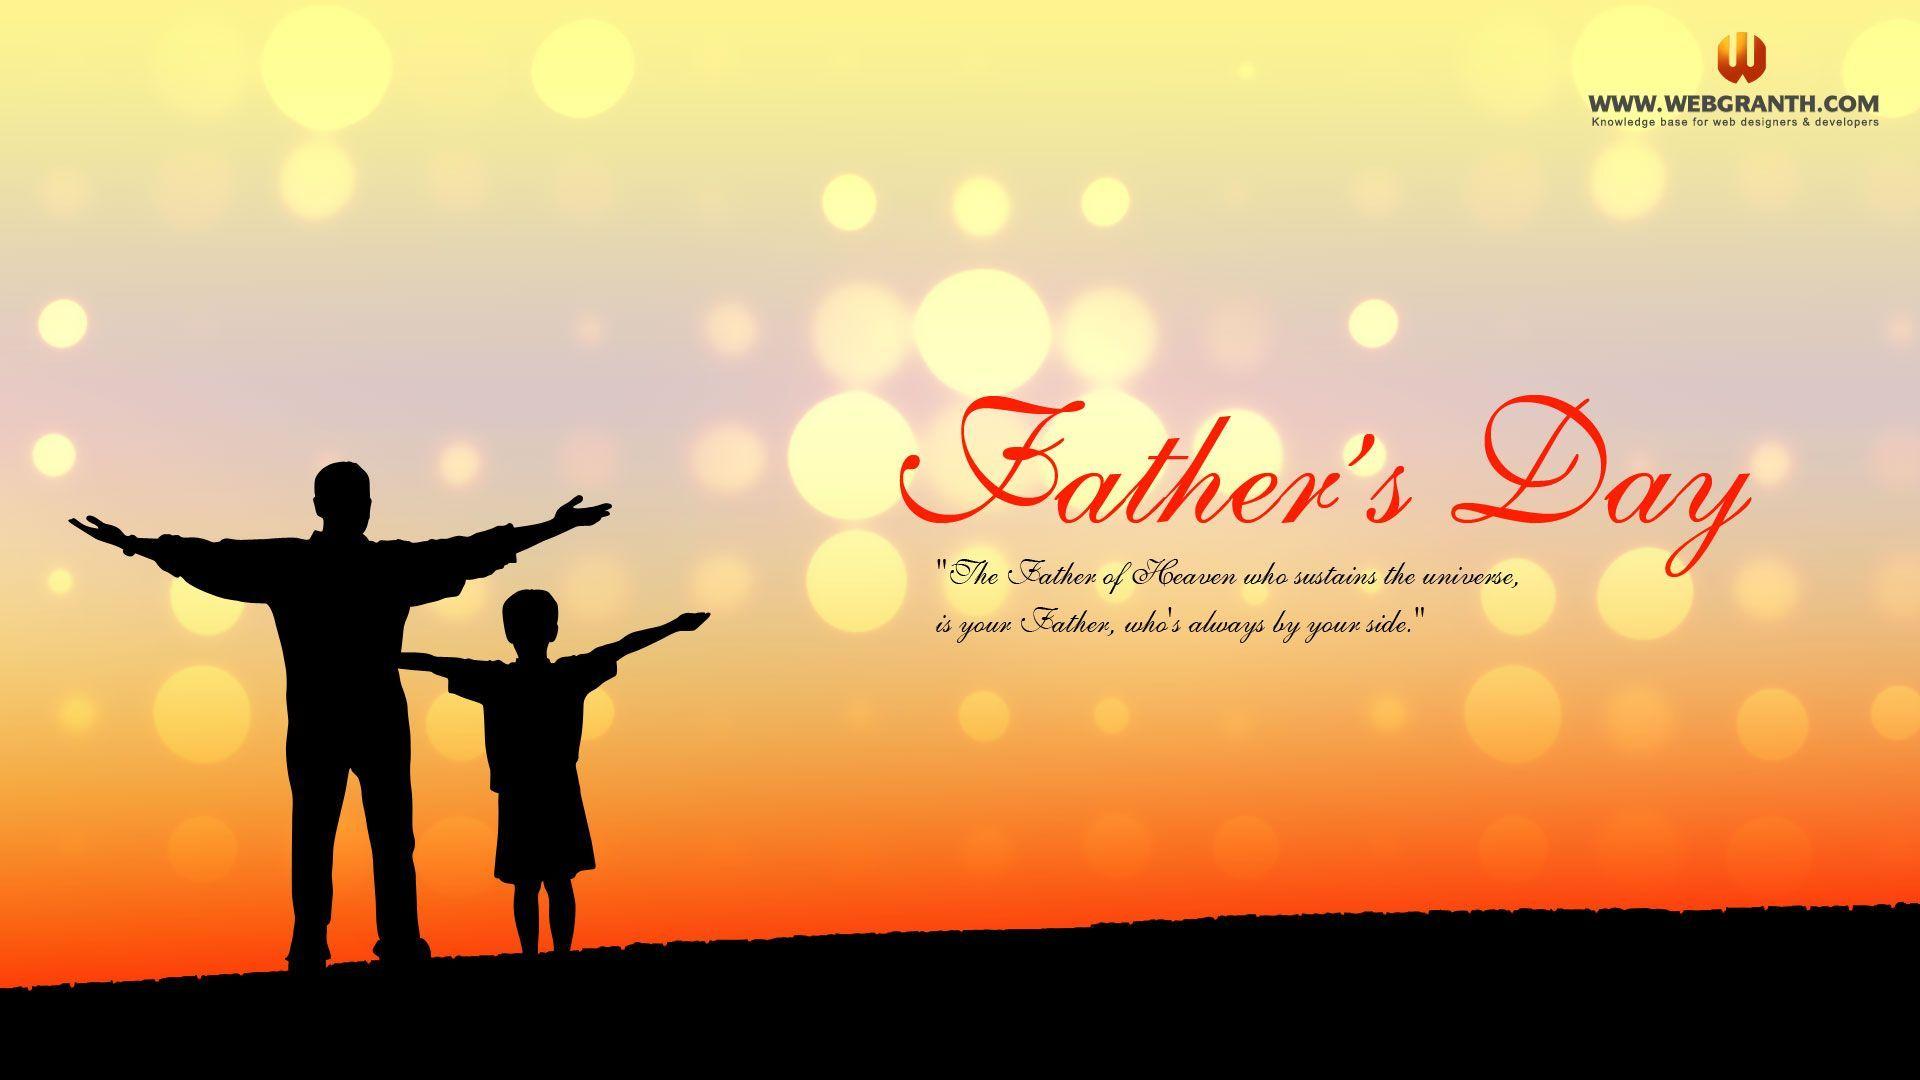 Father's Day Wallpaper HD Fathers Day Wallpaper